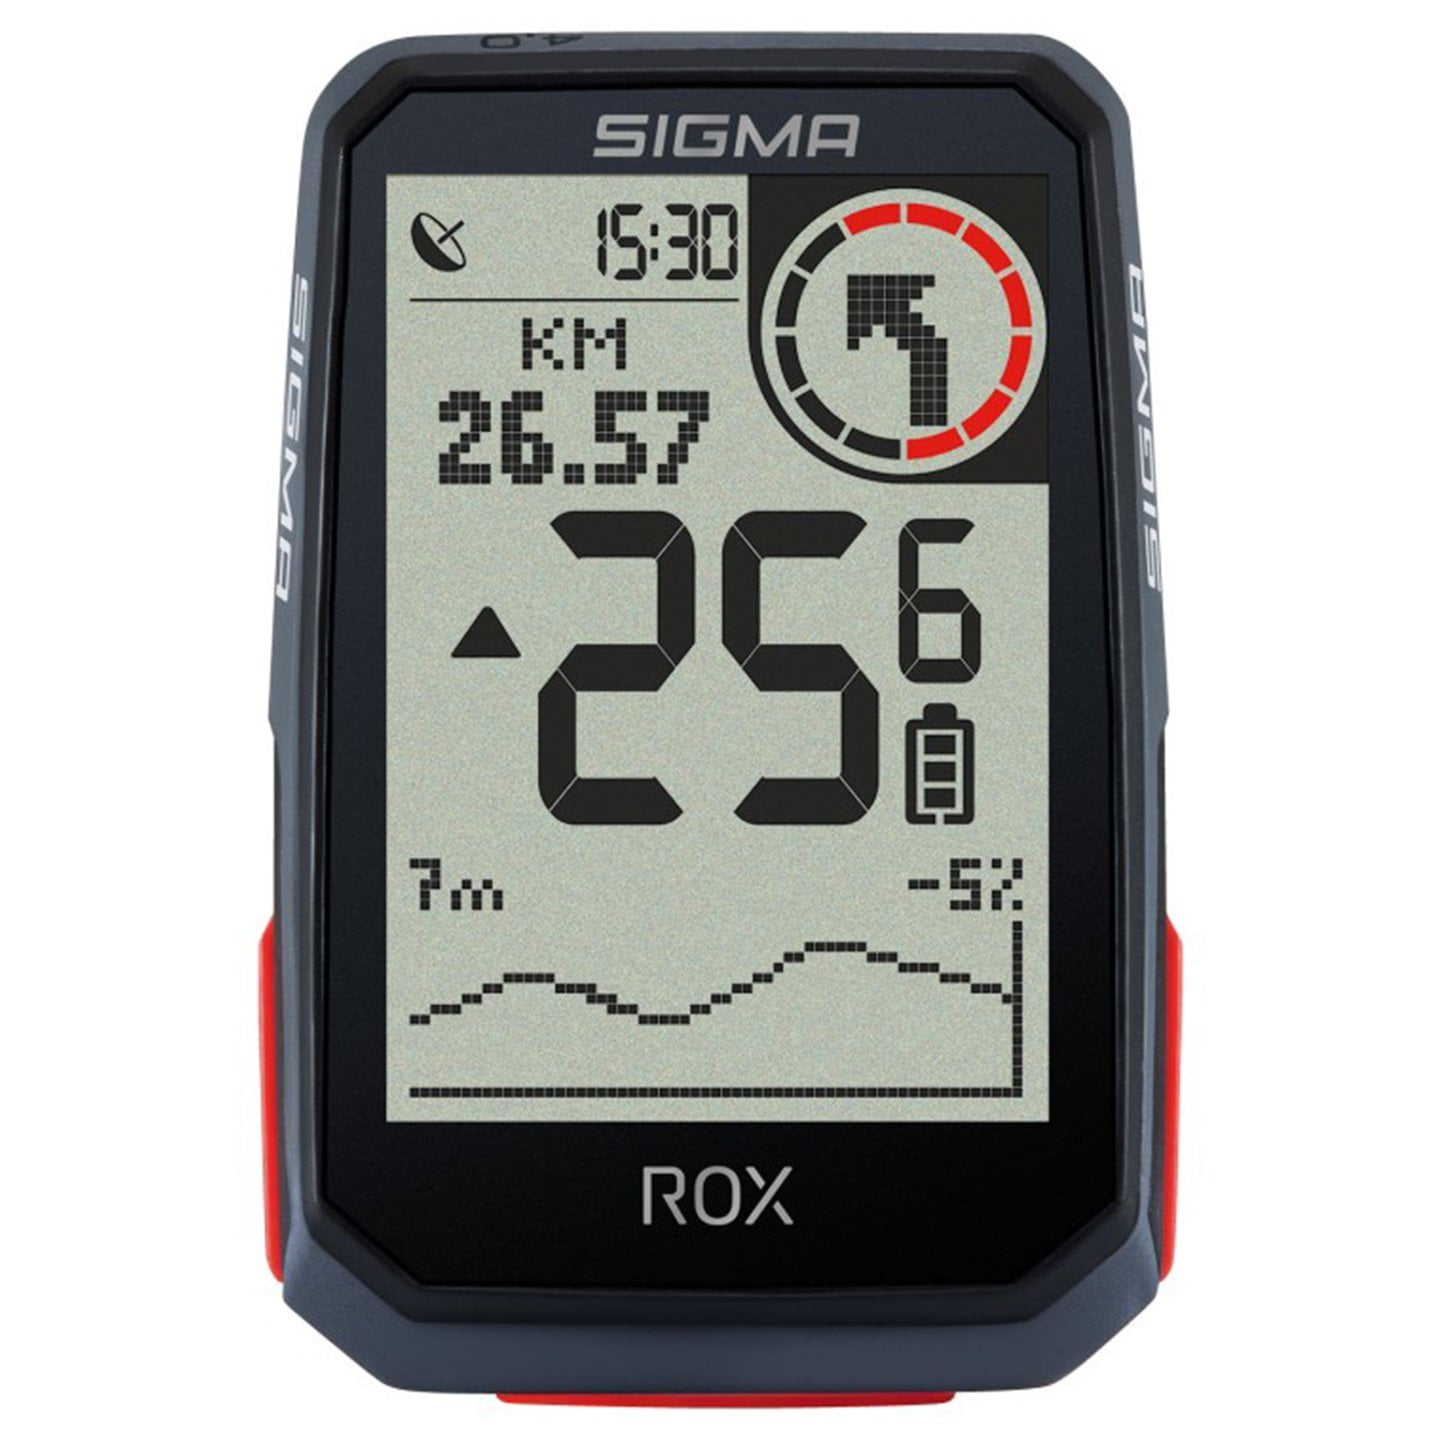 SIGMA ROX 4.0 HR Set Cycling Computer Cycling Computer, Bike accessories